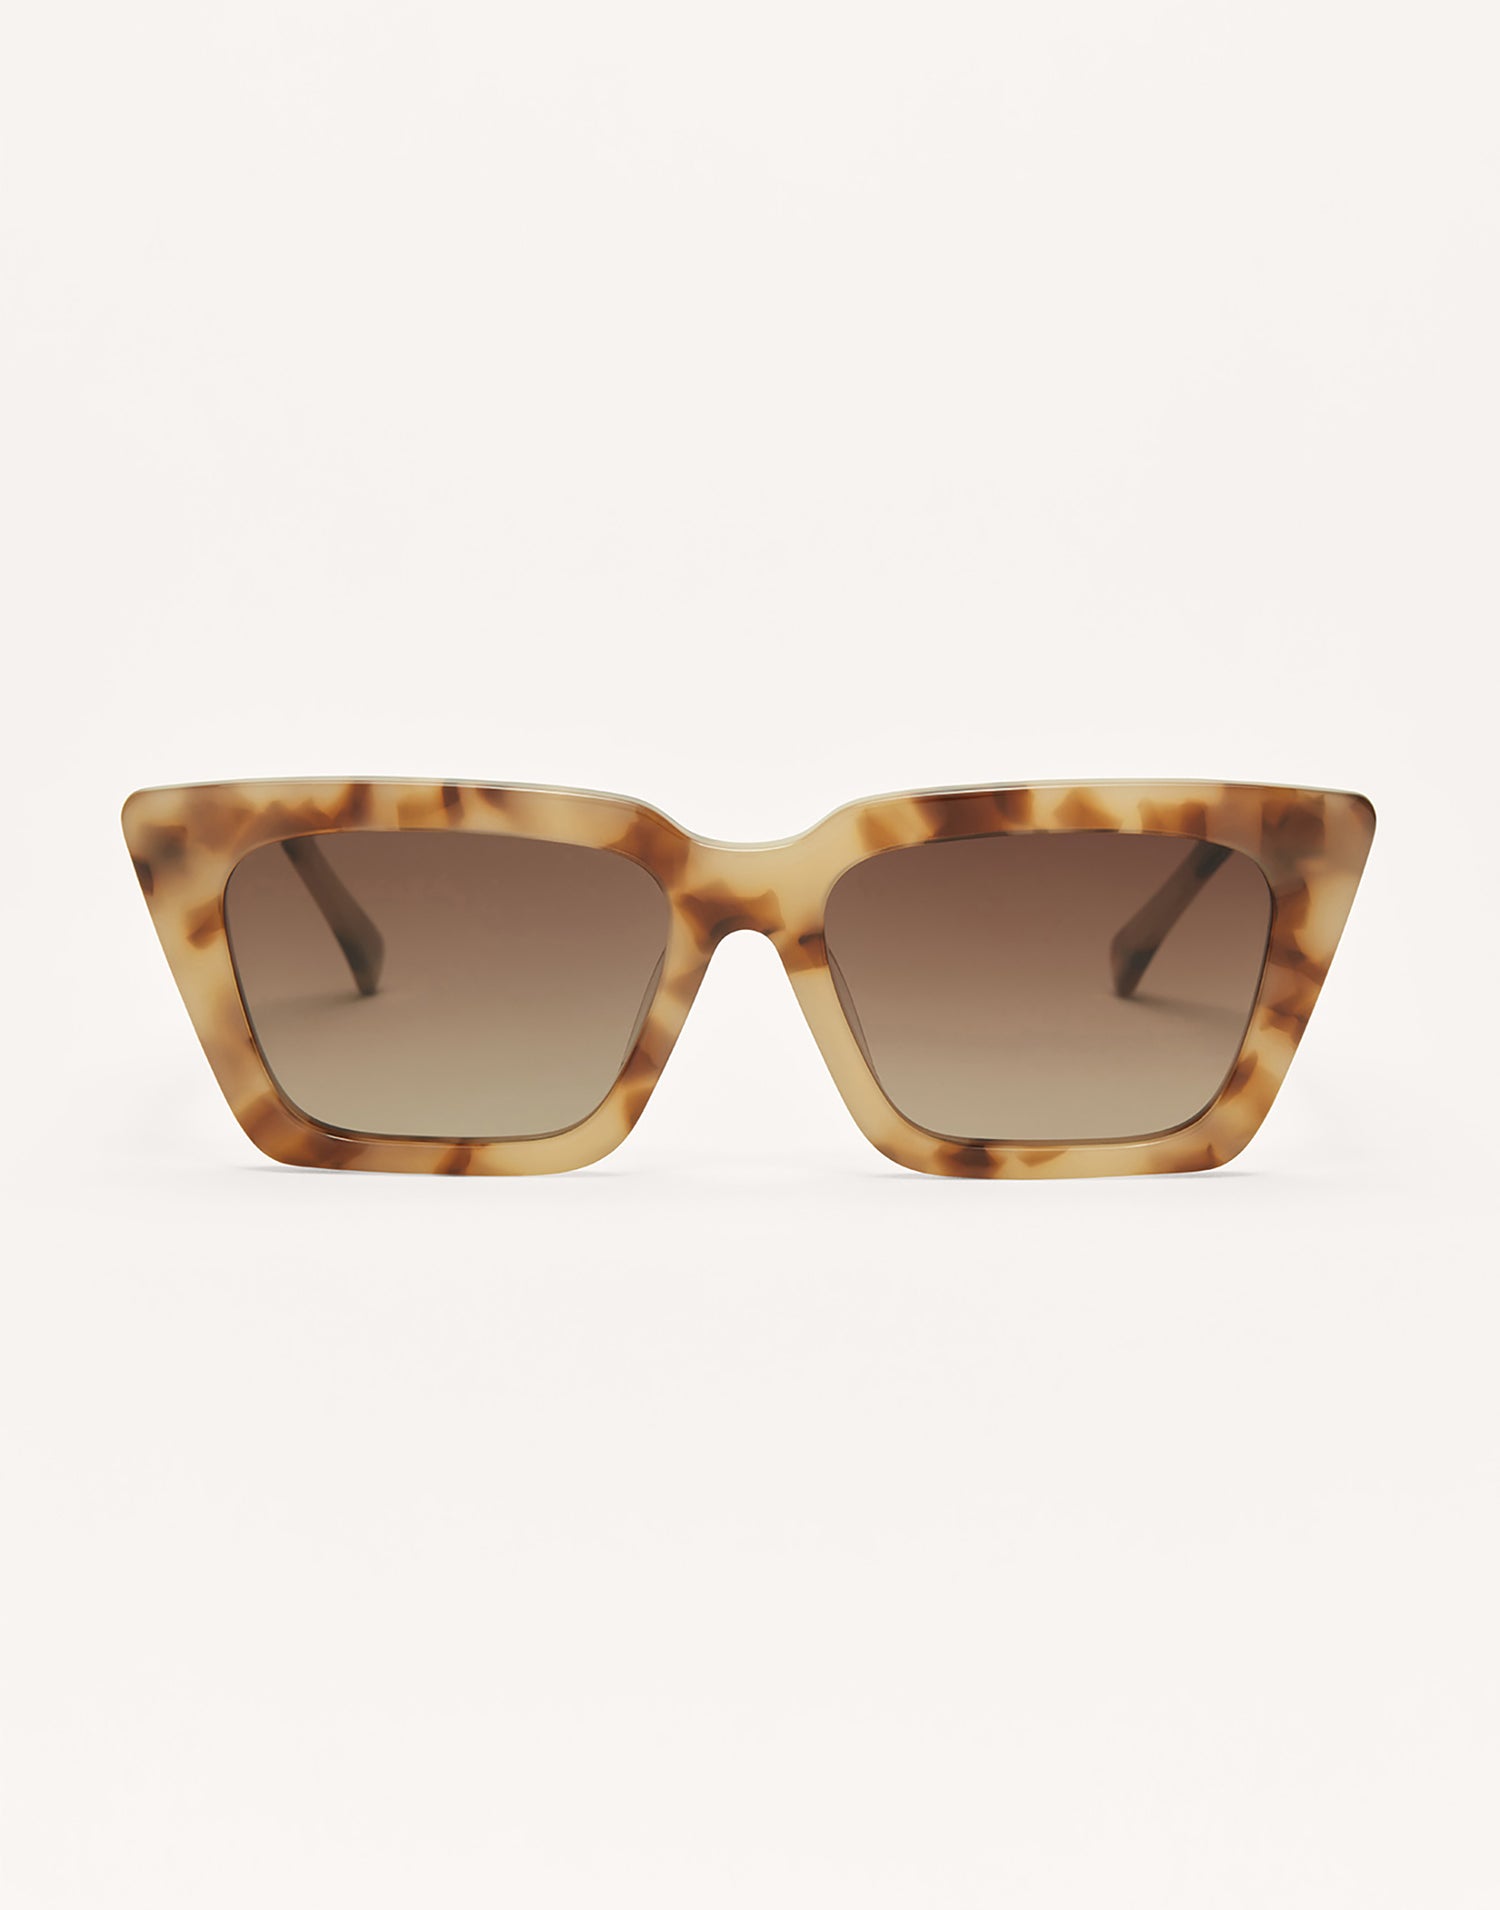 Feel Good Sunglasses by Z Supply in Blonde Tort - Front View